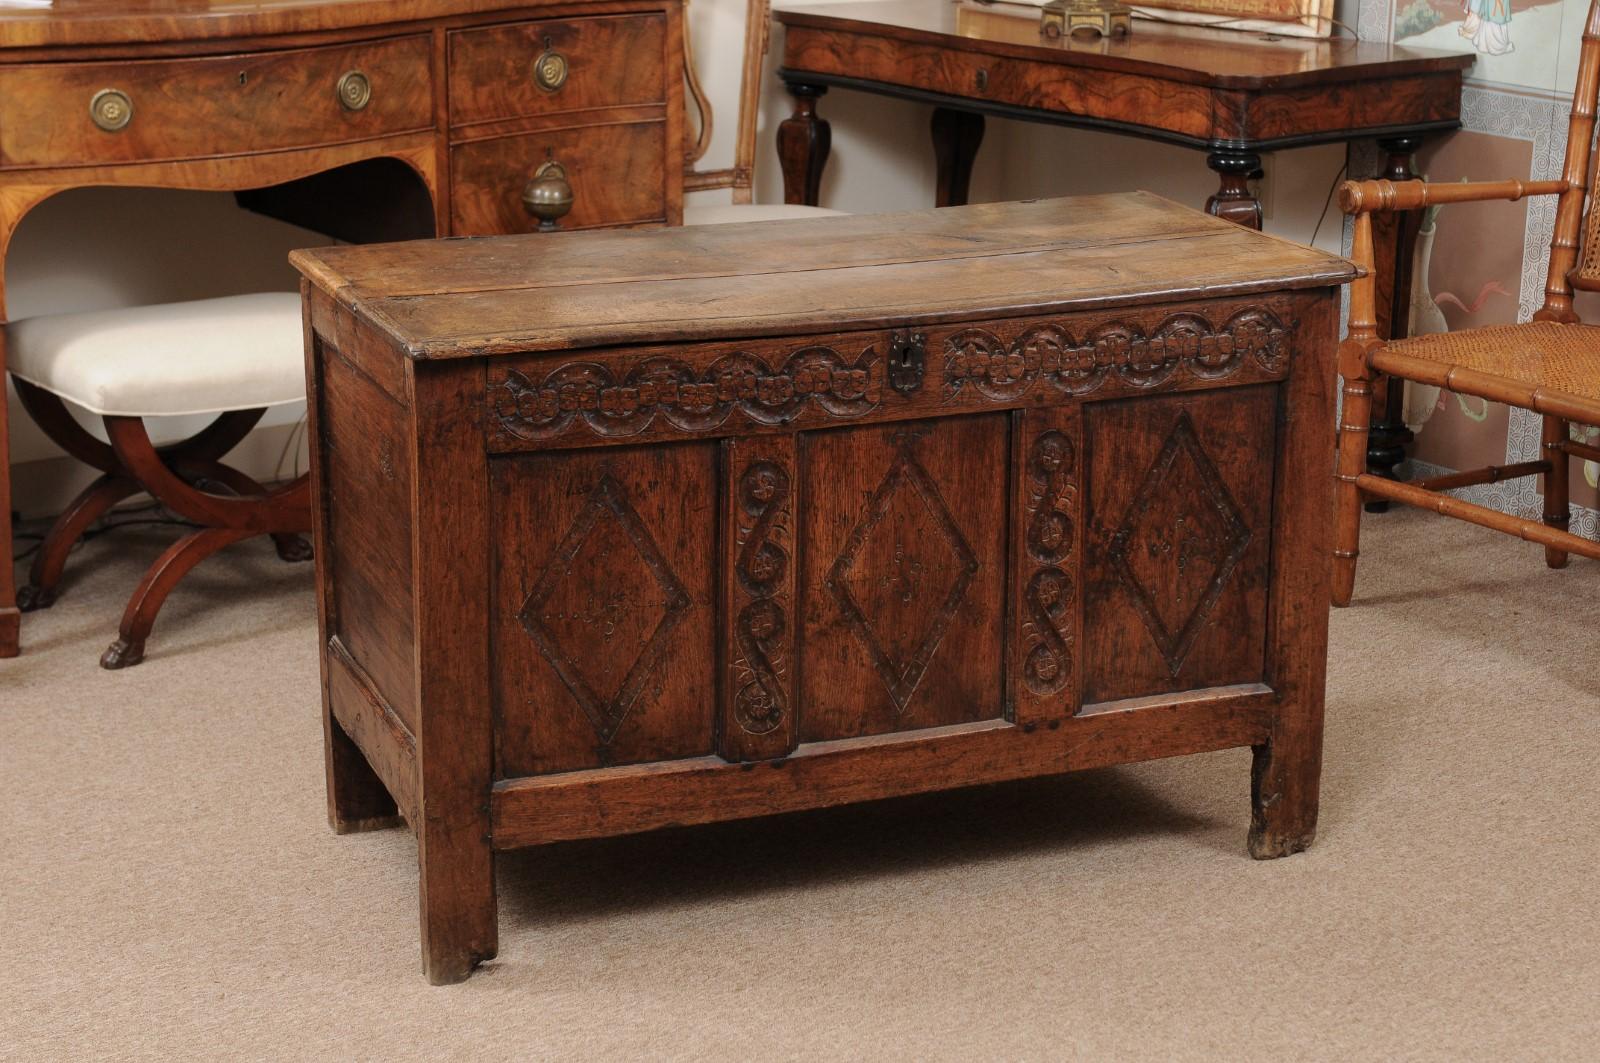 Oak hinged top trunk/coffer with lozenge carved panels, 17th century, England.